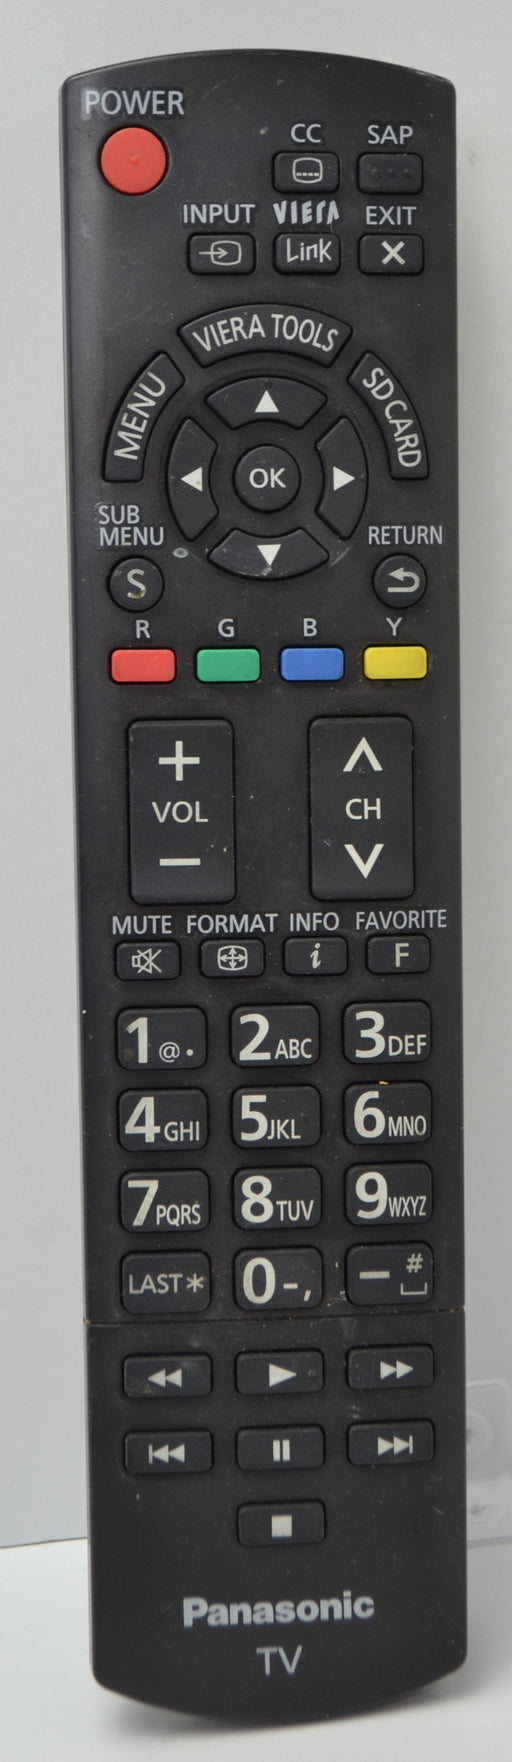 Panasonic N2QAYB000570 TV Remote Control for Model TC-32LX34 and More-Remote-SpenCertified-refurbished-vintage-electonics